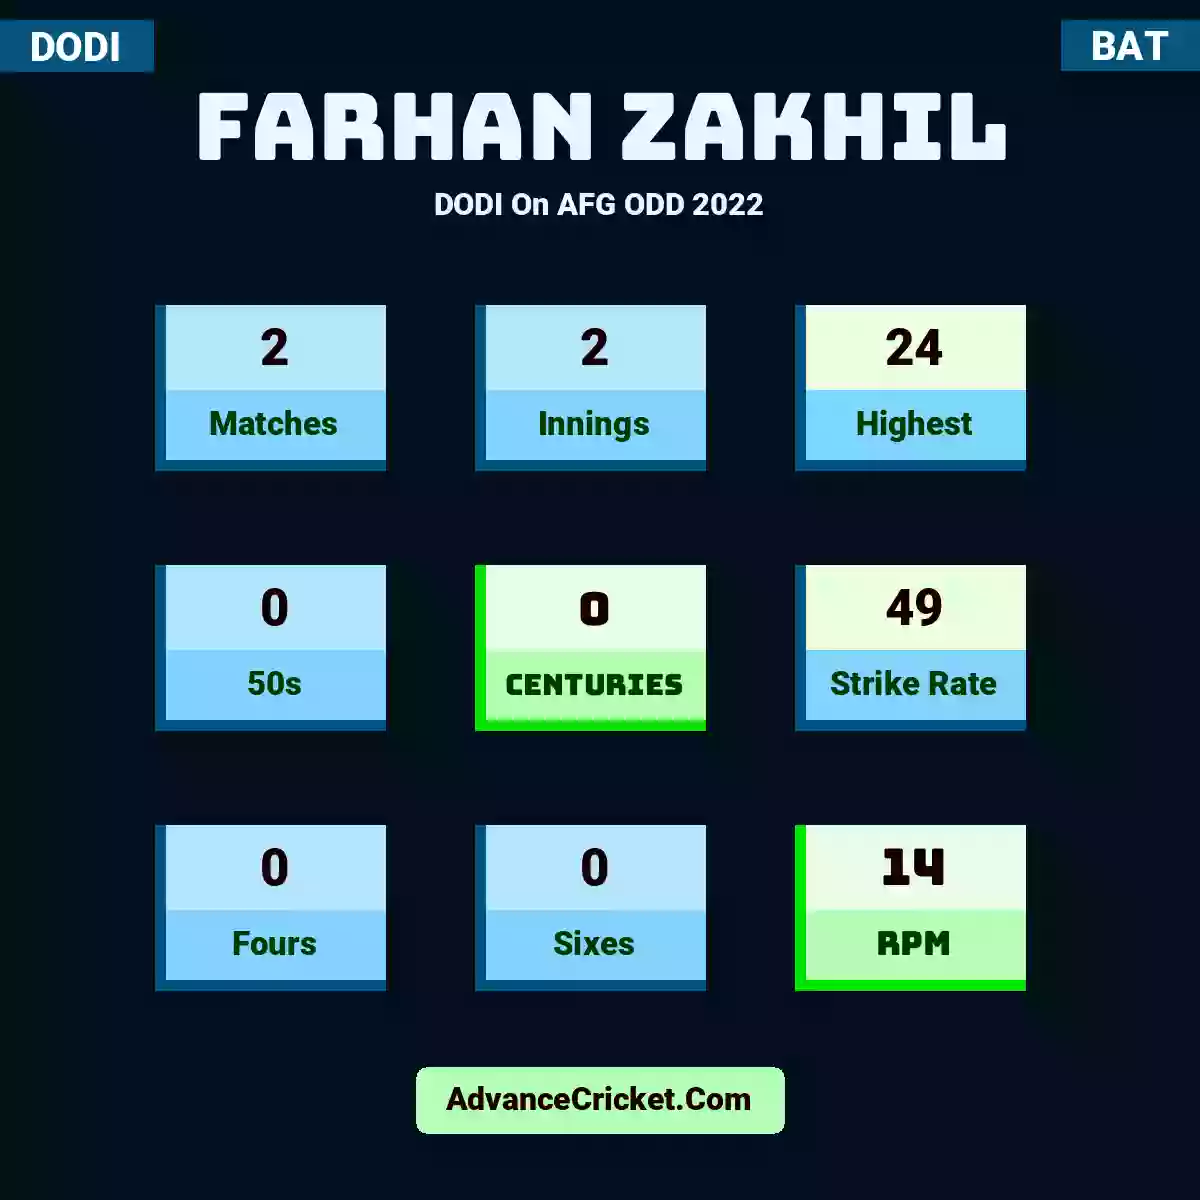 Farhan Zakhil DODI  On AFG ODD 2022, Farhan Zakhil played 2 matches, scored 24 runs as highest, 0 half-centuries, and 0 centuries, with a strike rate of 49. F.Zakhil hit 0 fours and 0 sixes, with an RPM of 14.